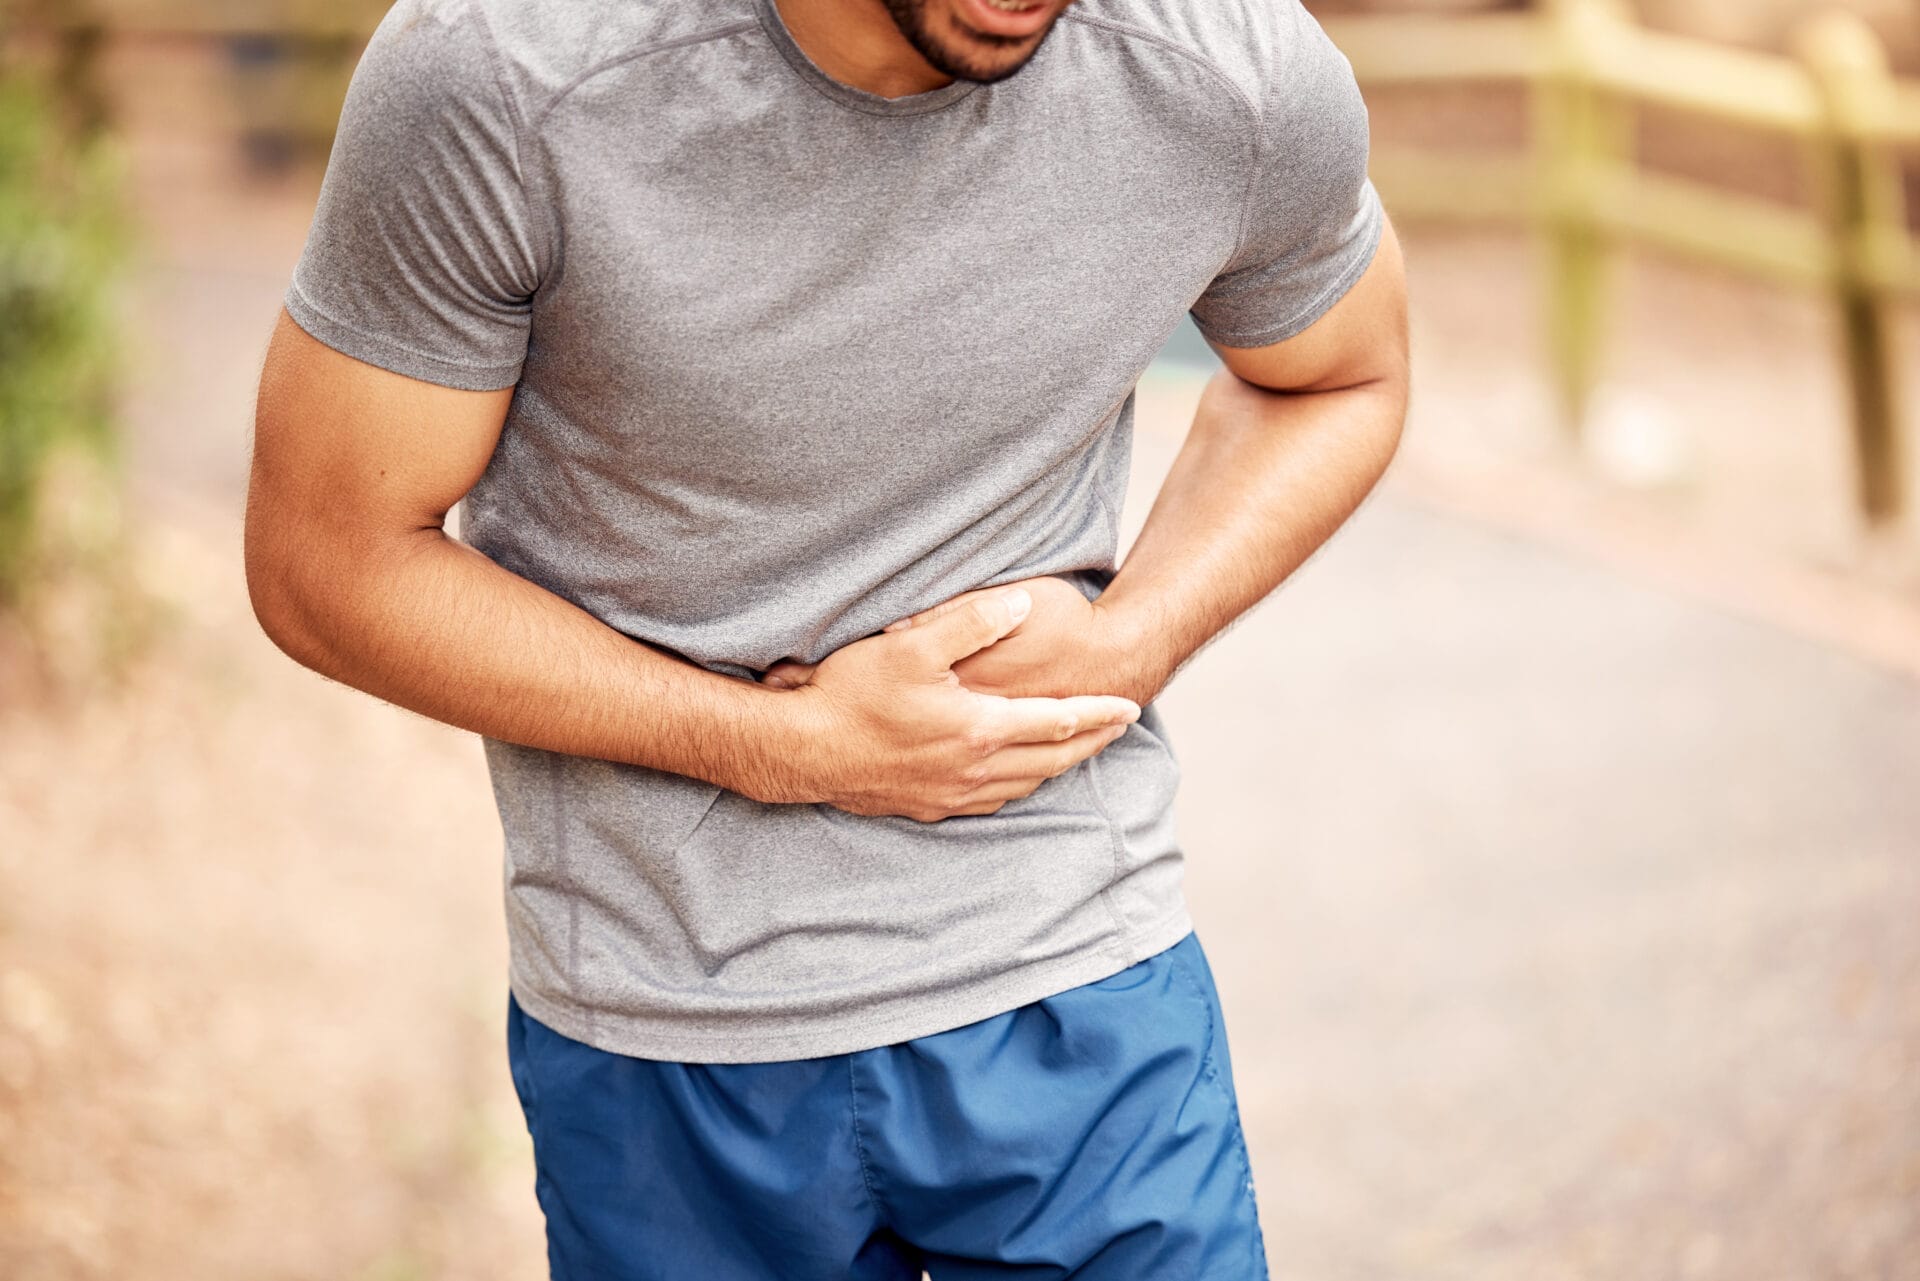 Fitness, stomach ache and man outdoor after running, workout or exercise. Sports, abdominal pain and male athlete in nature with injury, emergency or problem, sick or hernia after training mockup